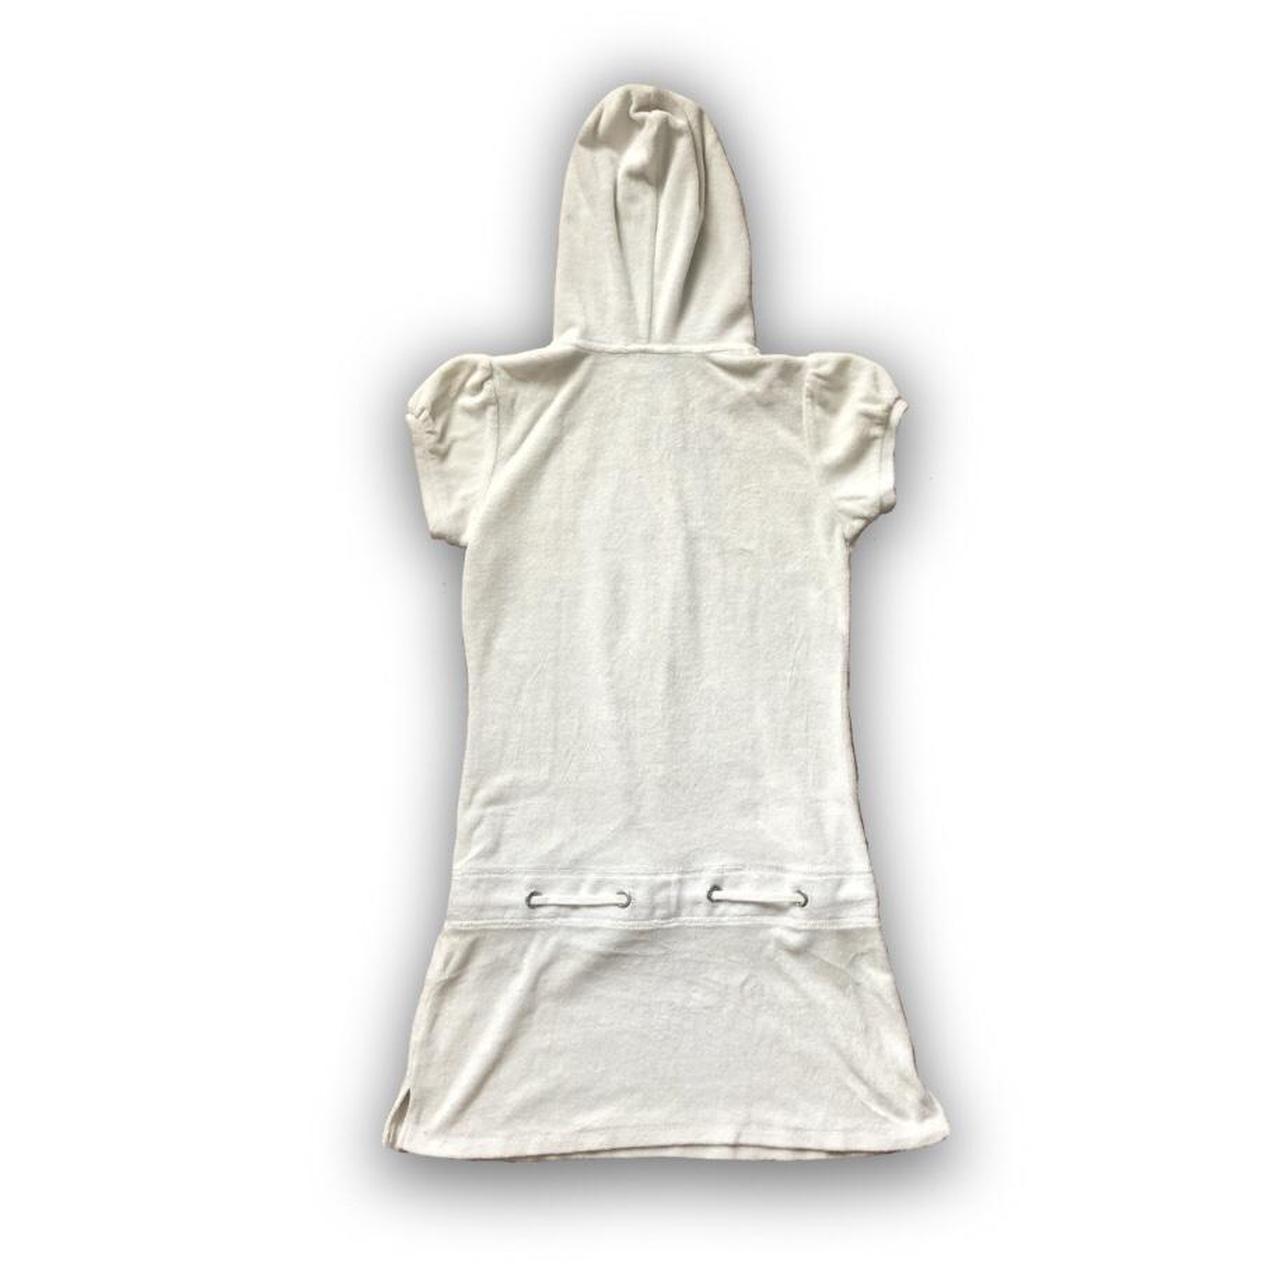 Product Image 2 - THE HILTON TERRY CLOTH DRESS
white